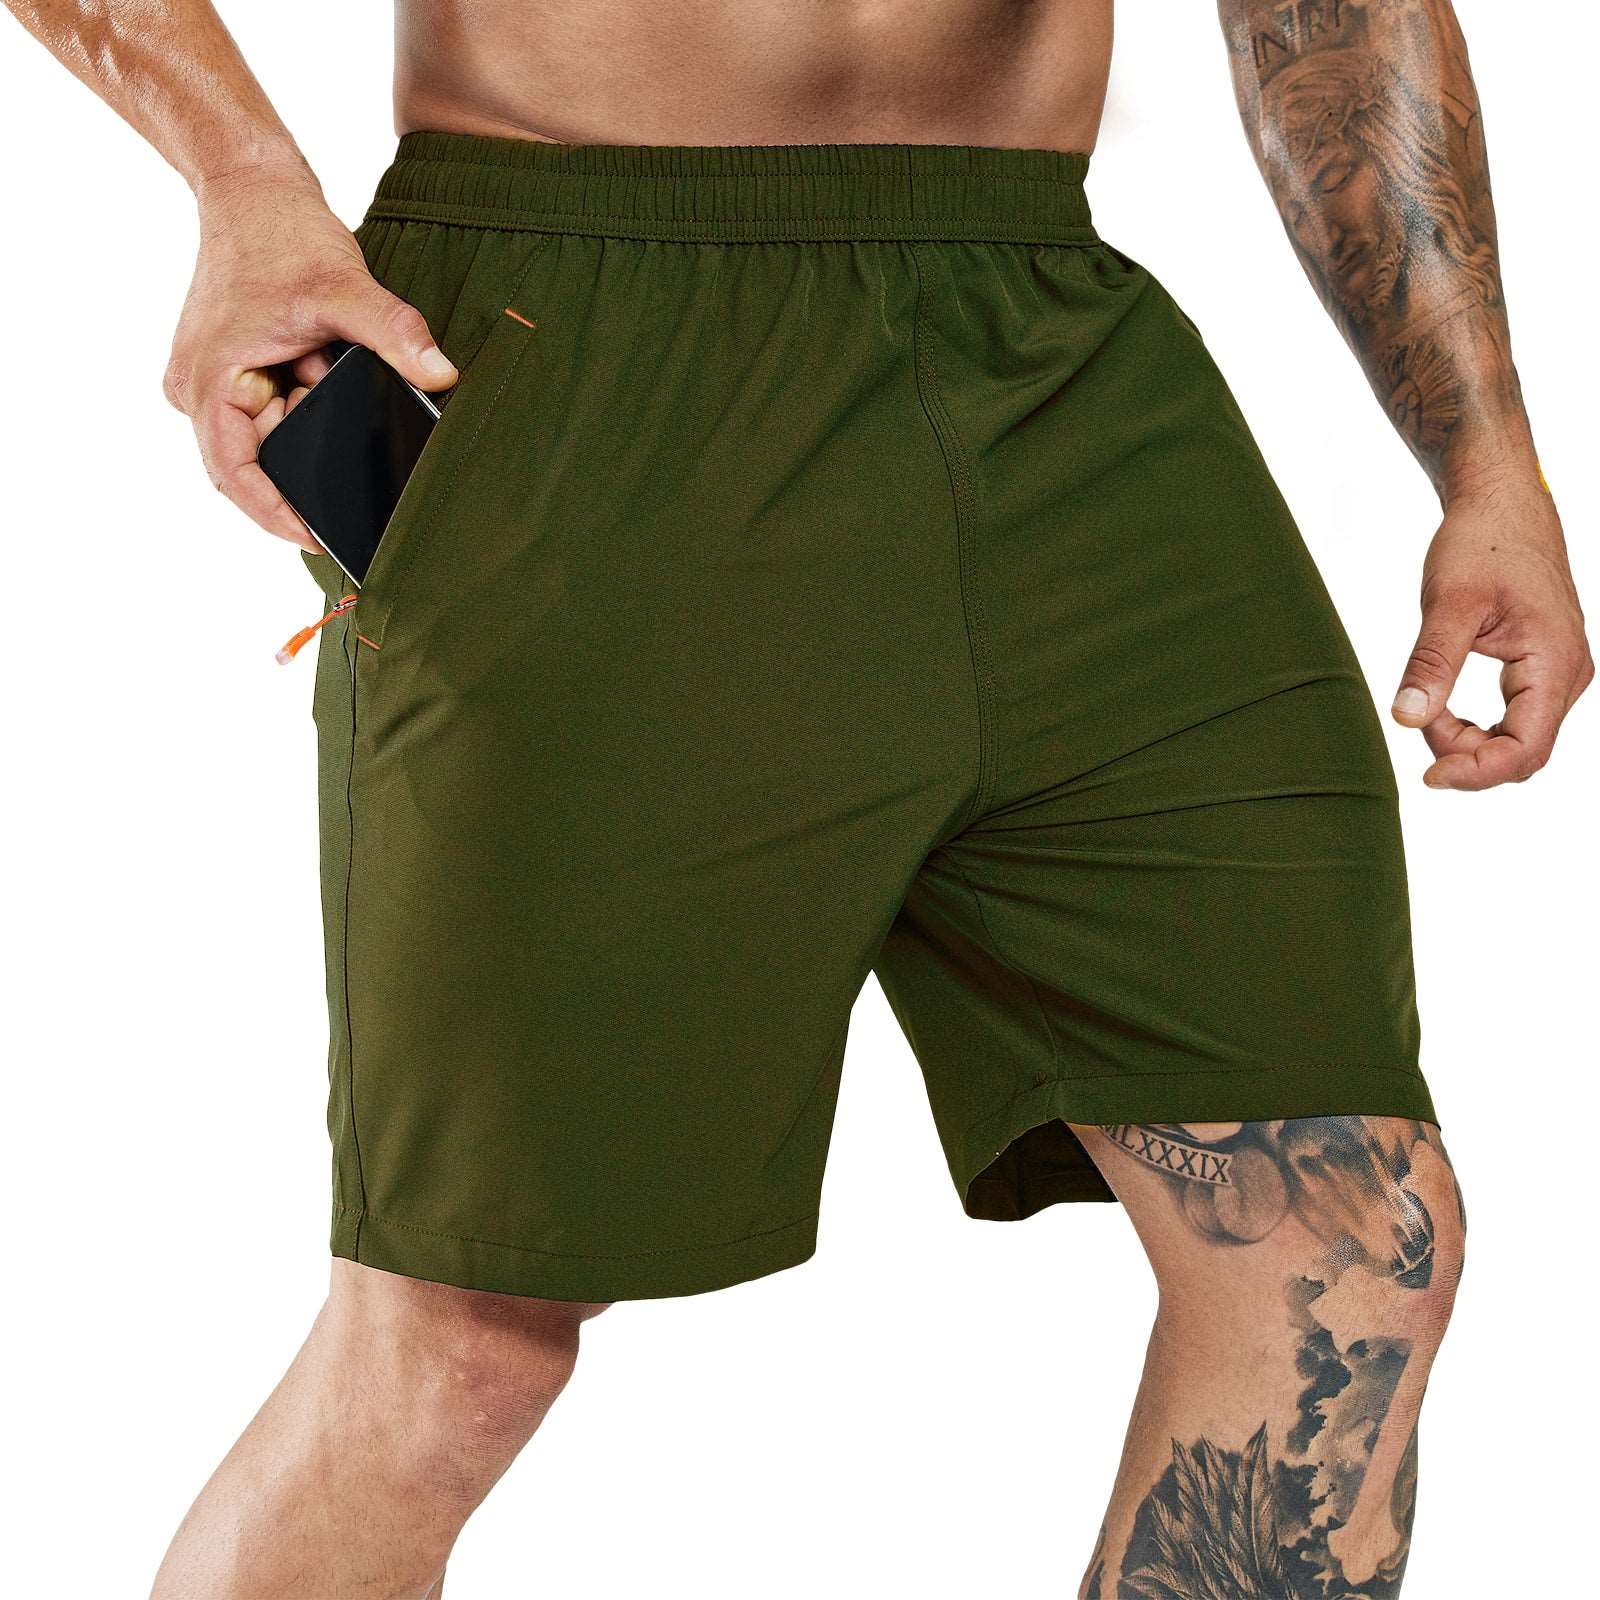  Mens Athletic Hiking Shorts Quick Dry Workout